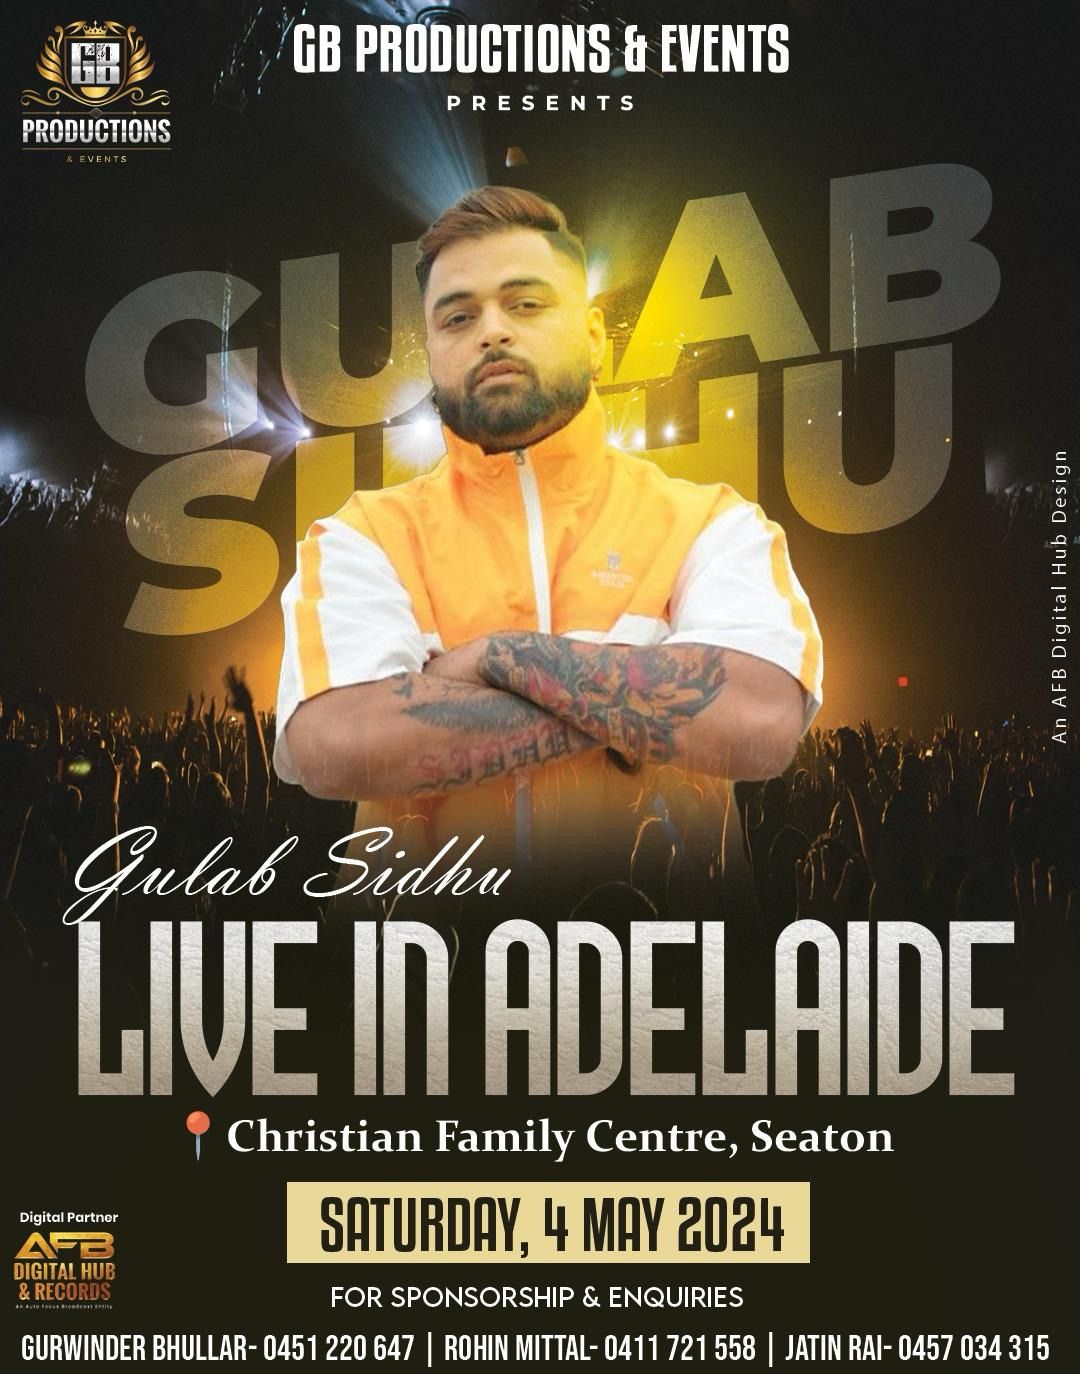 Gulab Sidhu First time Live in Adelaide 